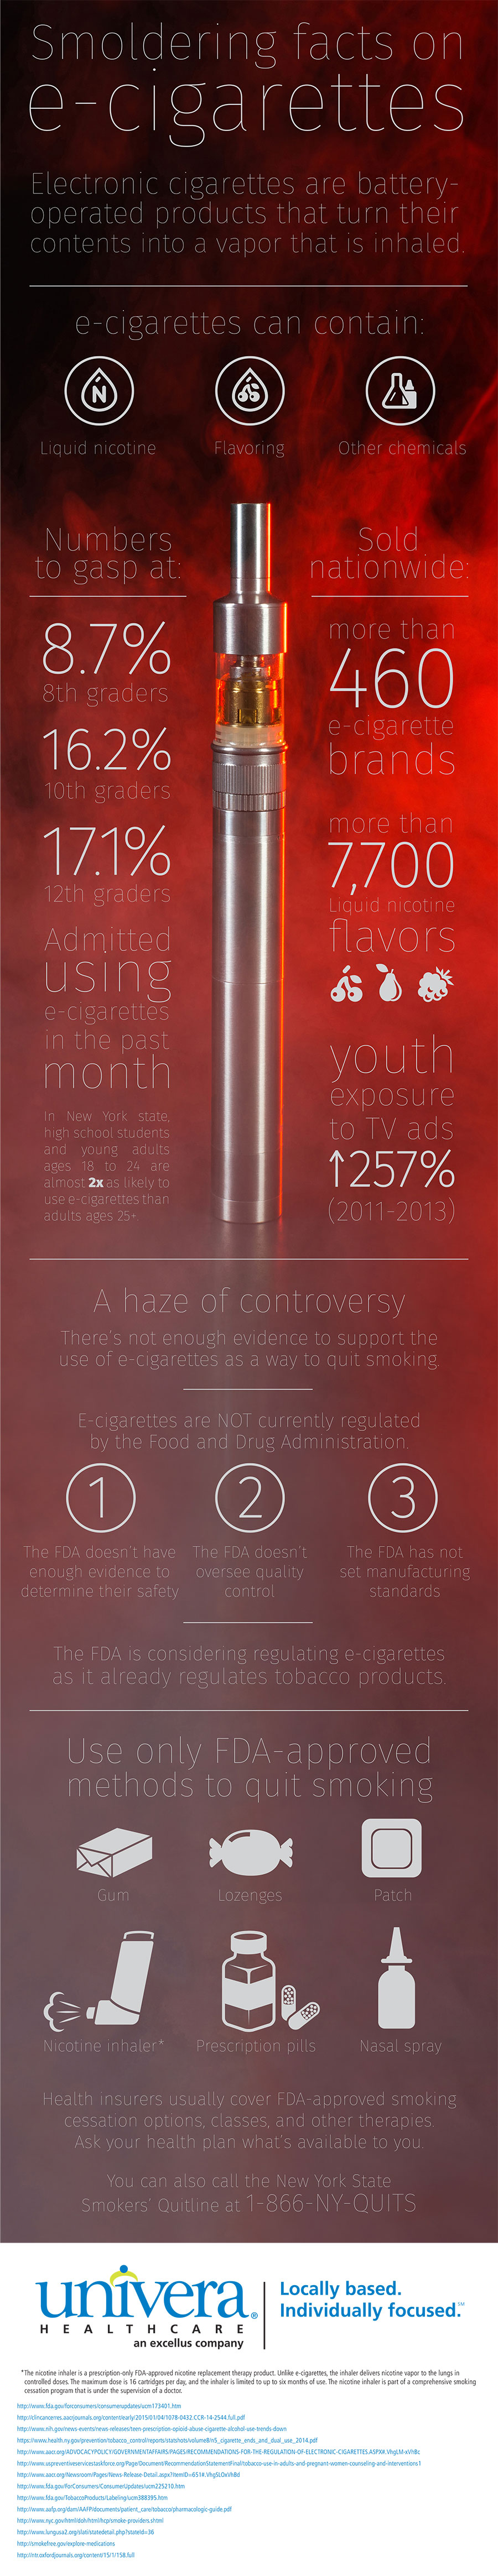 If you're planning to quit smoking, e-cigarettes may not be the answer. 